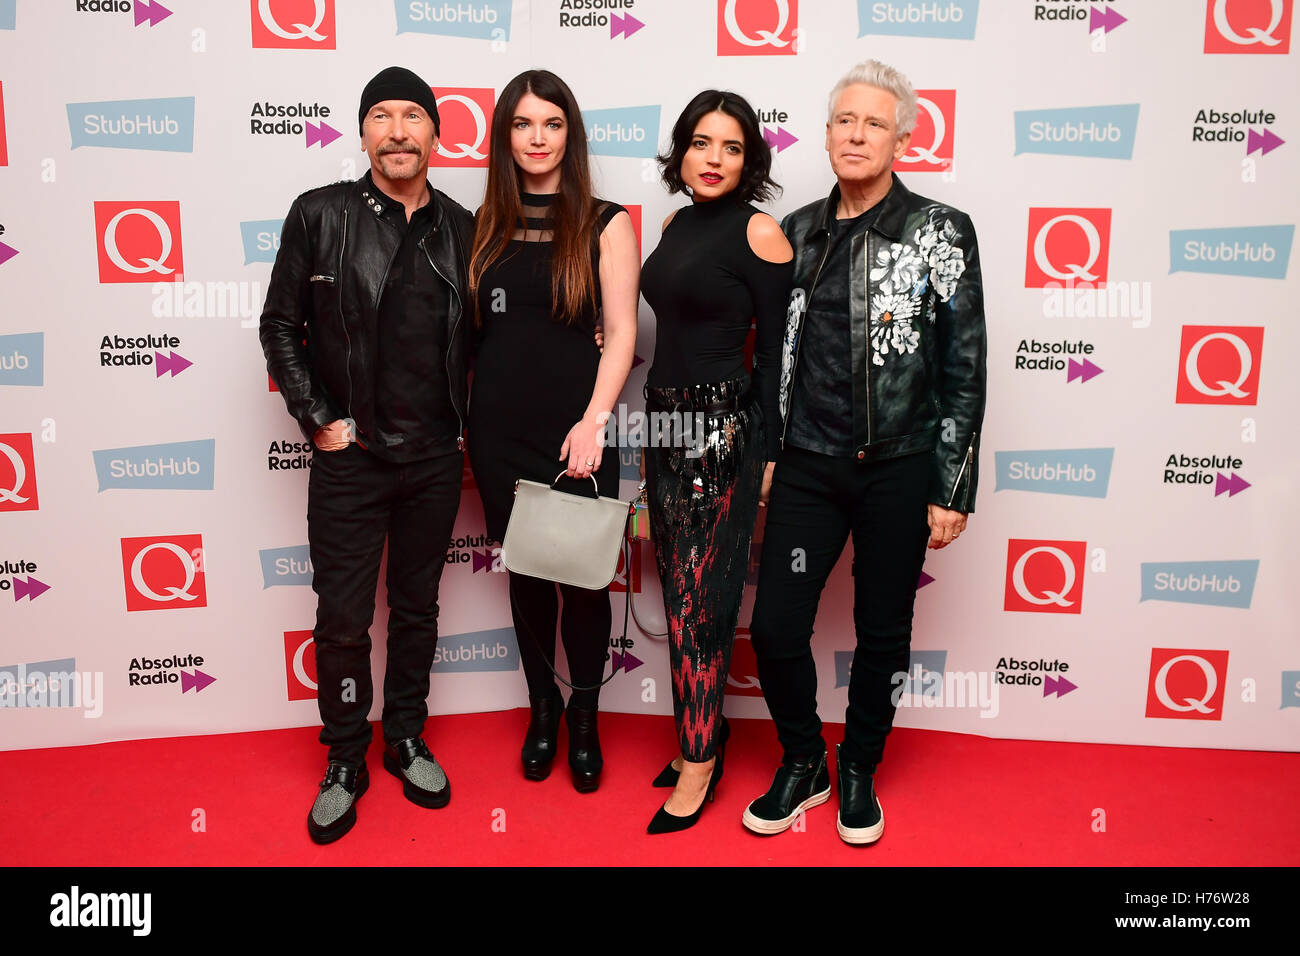 (left-right) The Edge, his guest, Mariana Teixeira De Carvalho and Adam Clayton attending the Stubhub Q Awards 2016, in association with Absolute Radio, at the Roundhouse, London. Stock Photo